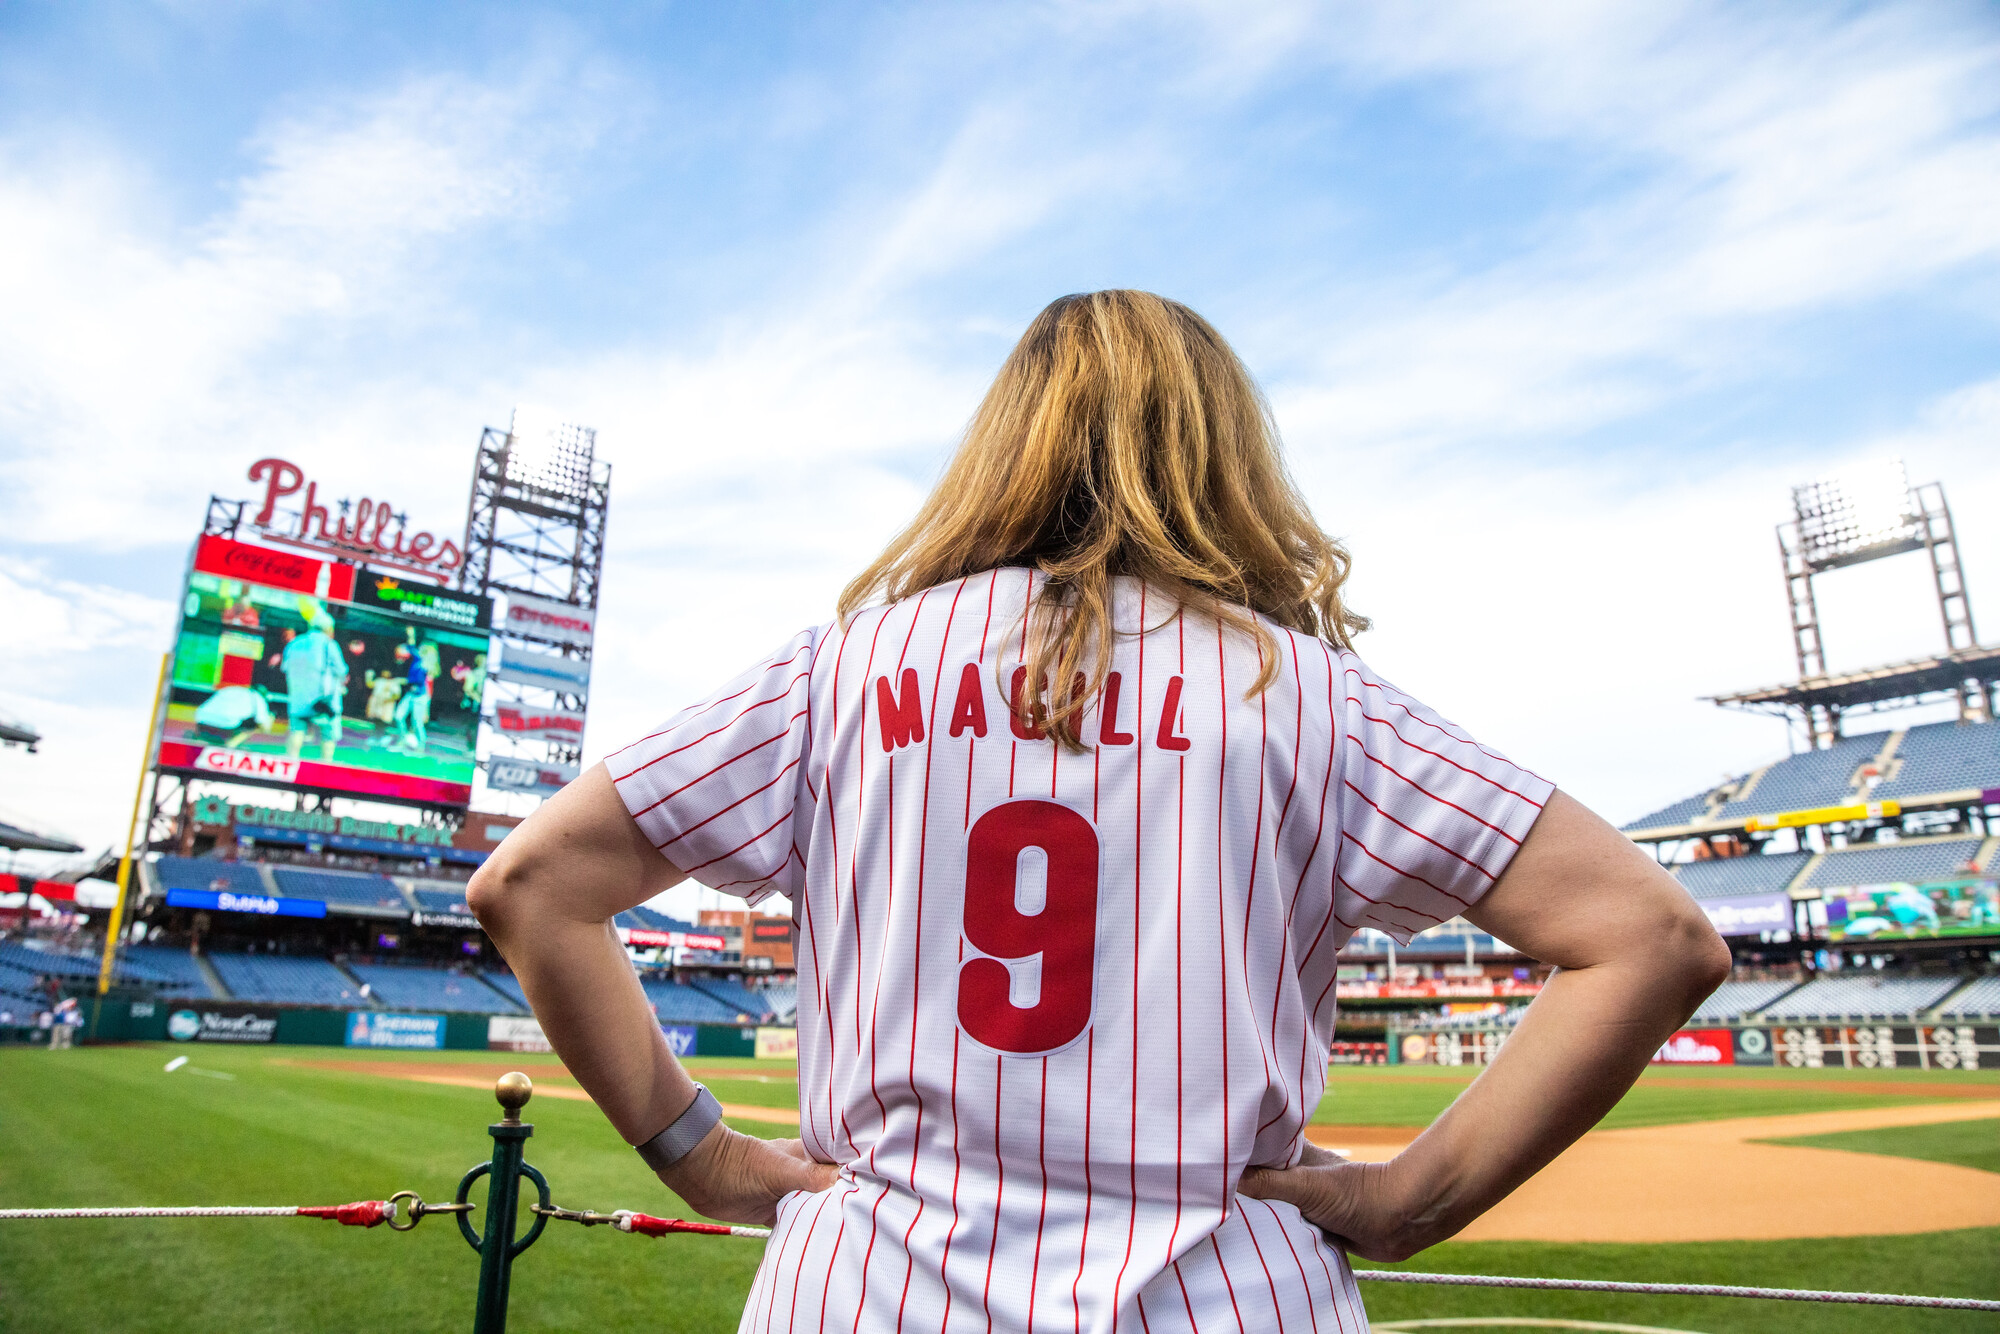 Shot of back of Magill's baseball shirt with "Magill" on it and a number "9"